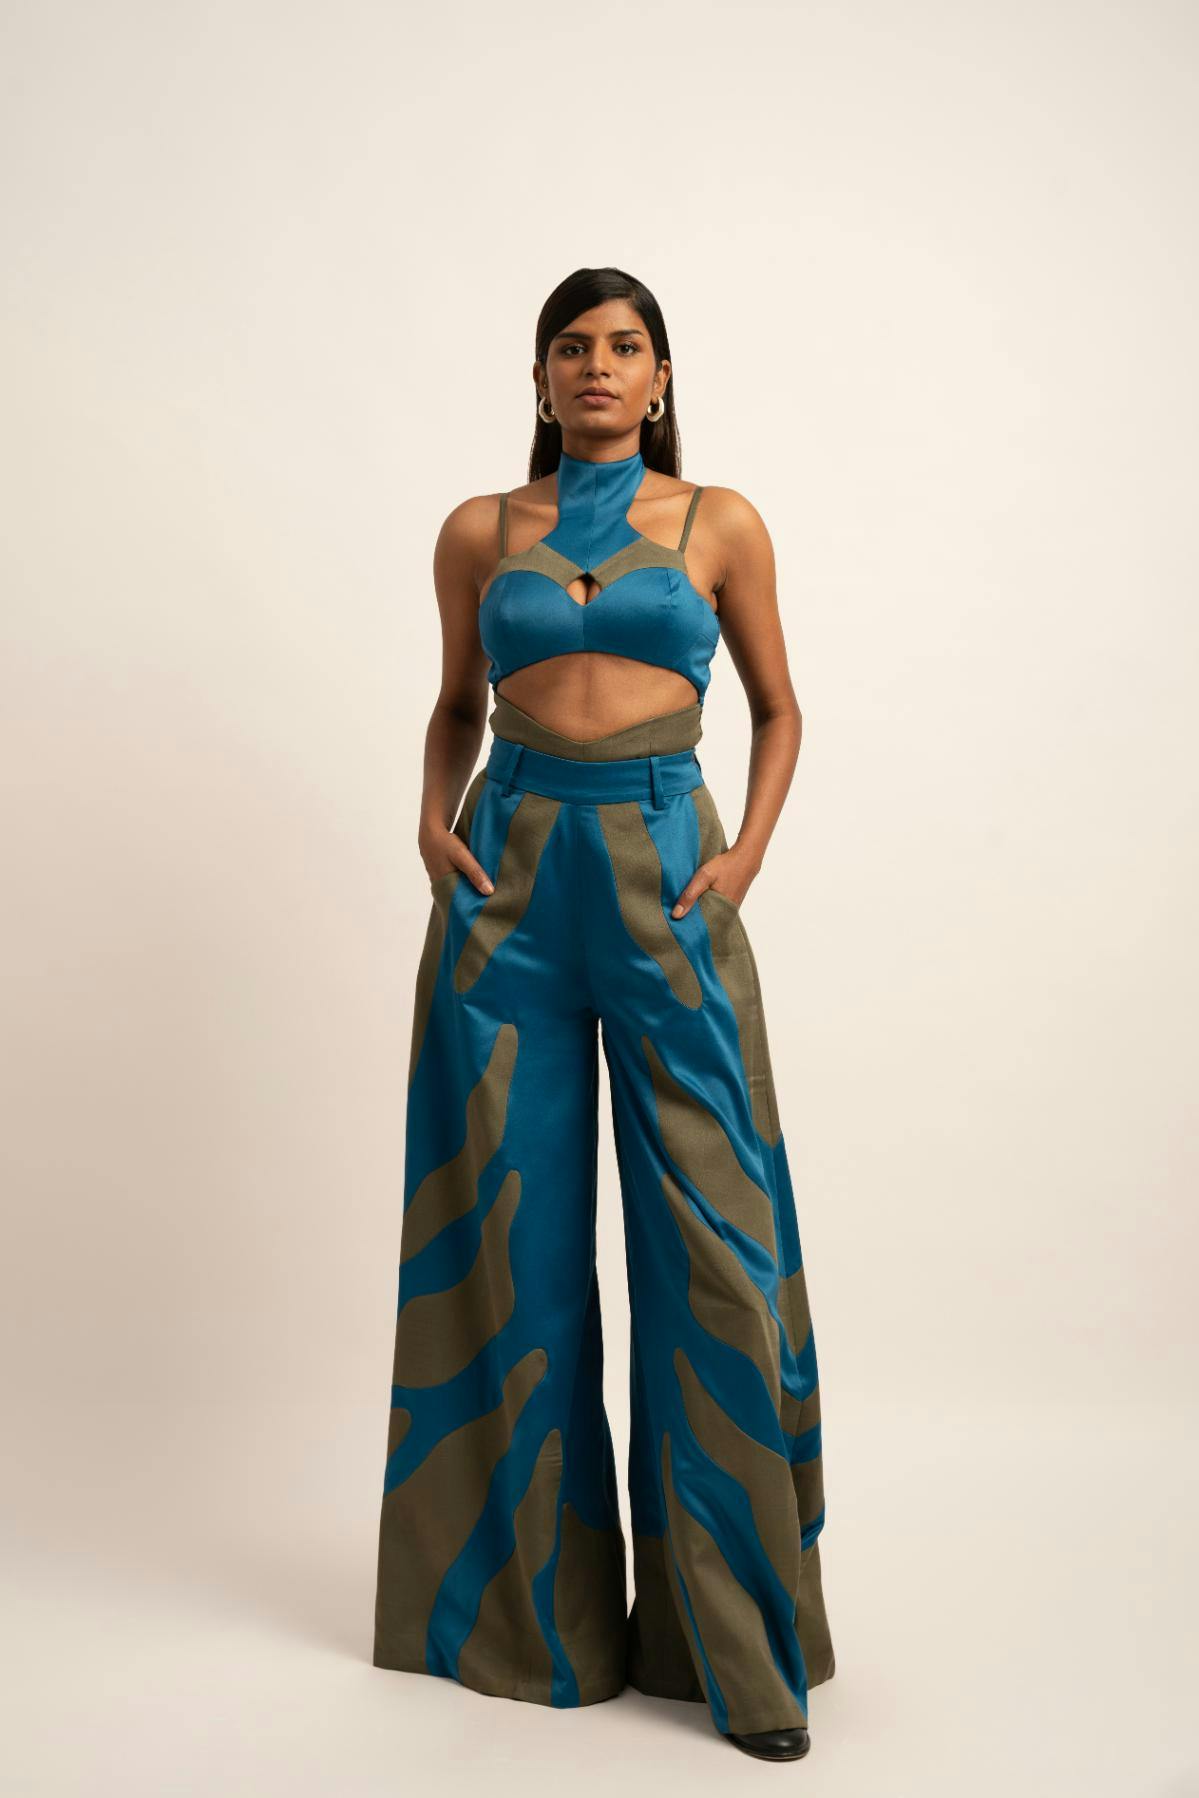 The Serene Chaos Bodysuit, a product by Siddhant Agrawal Label